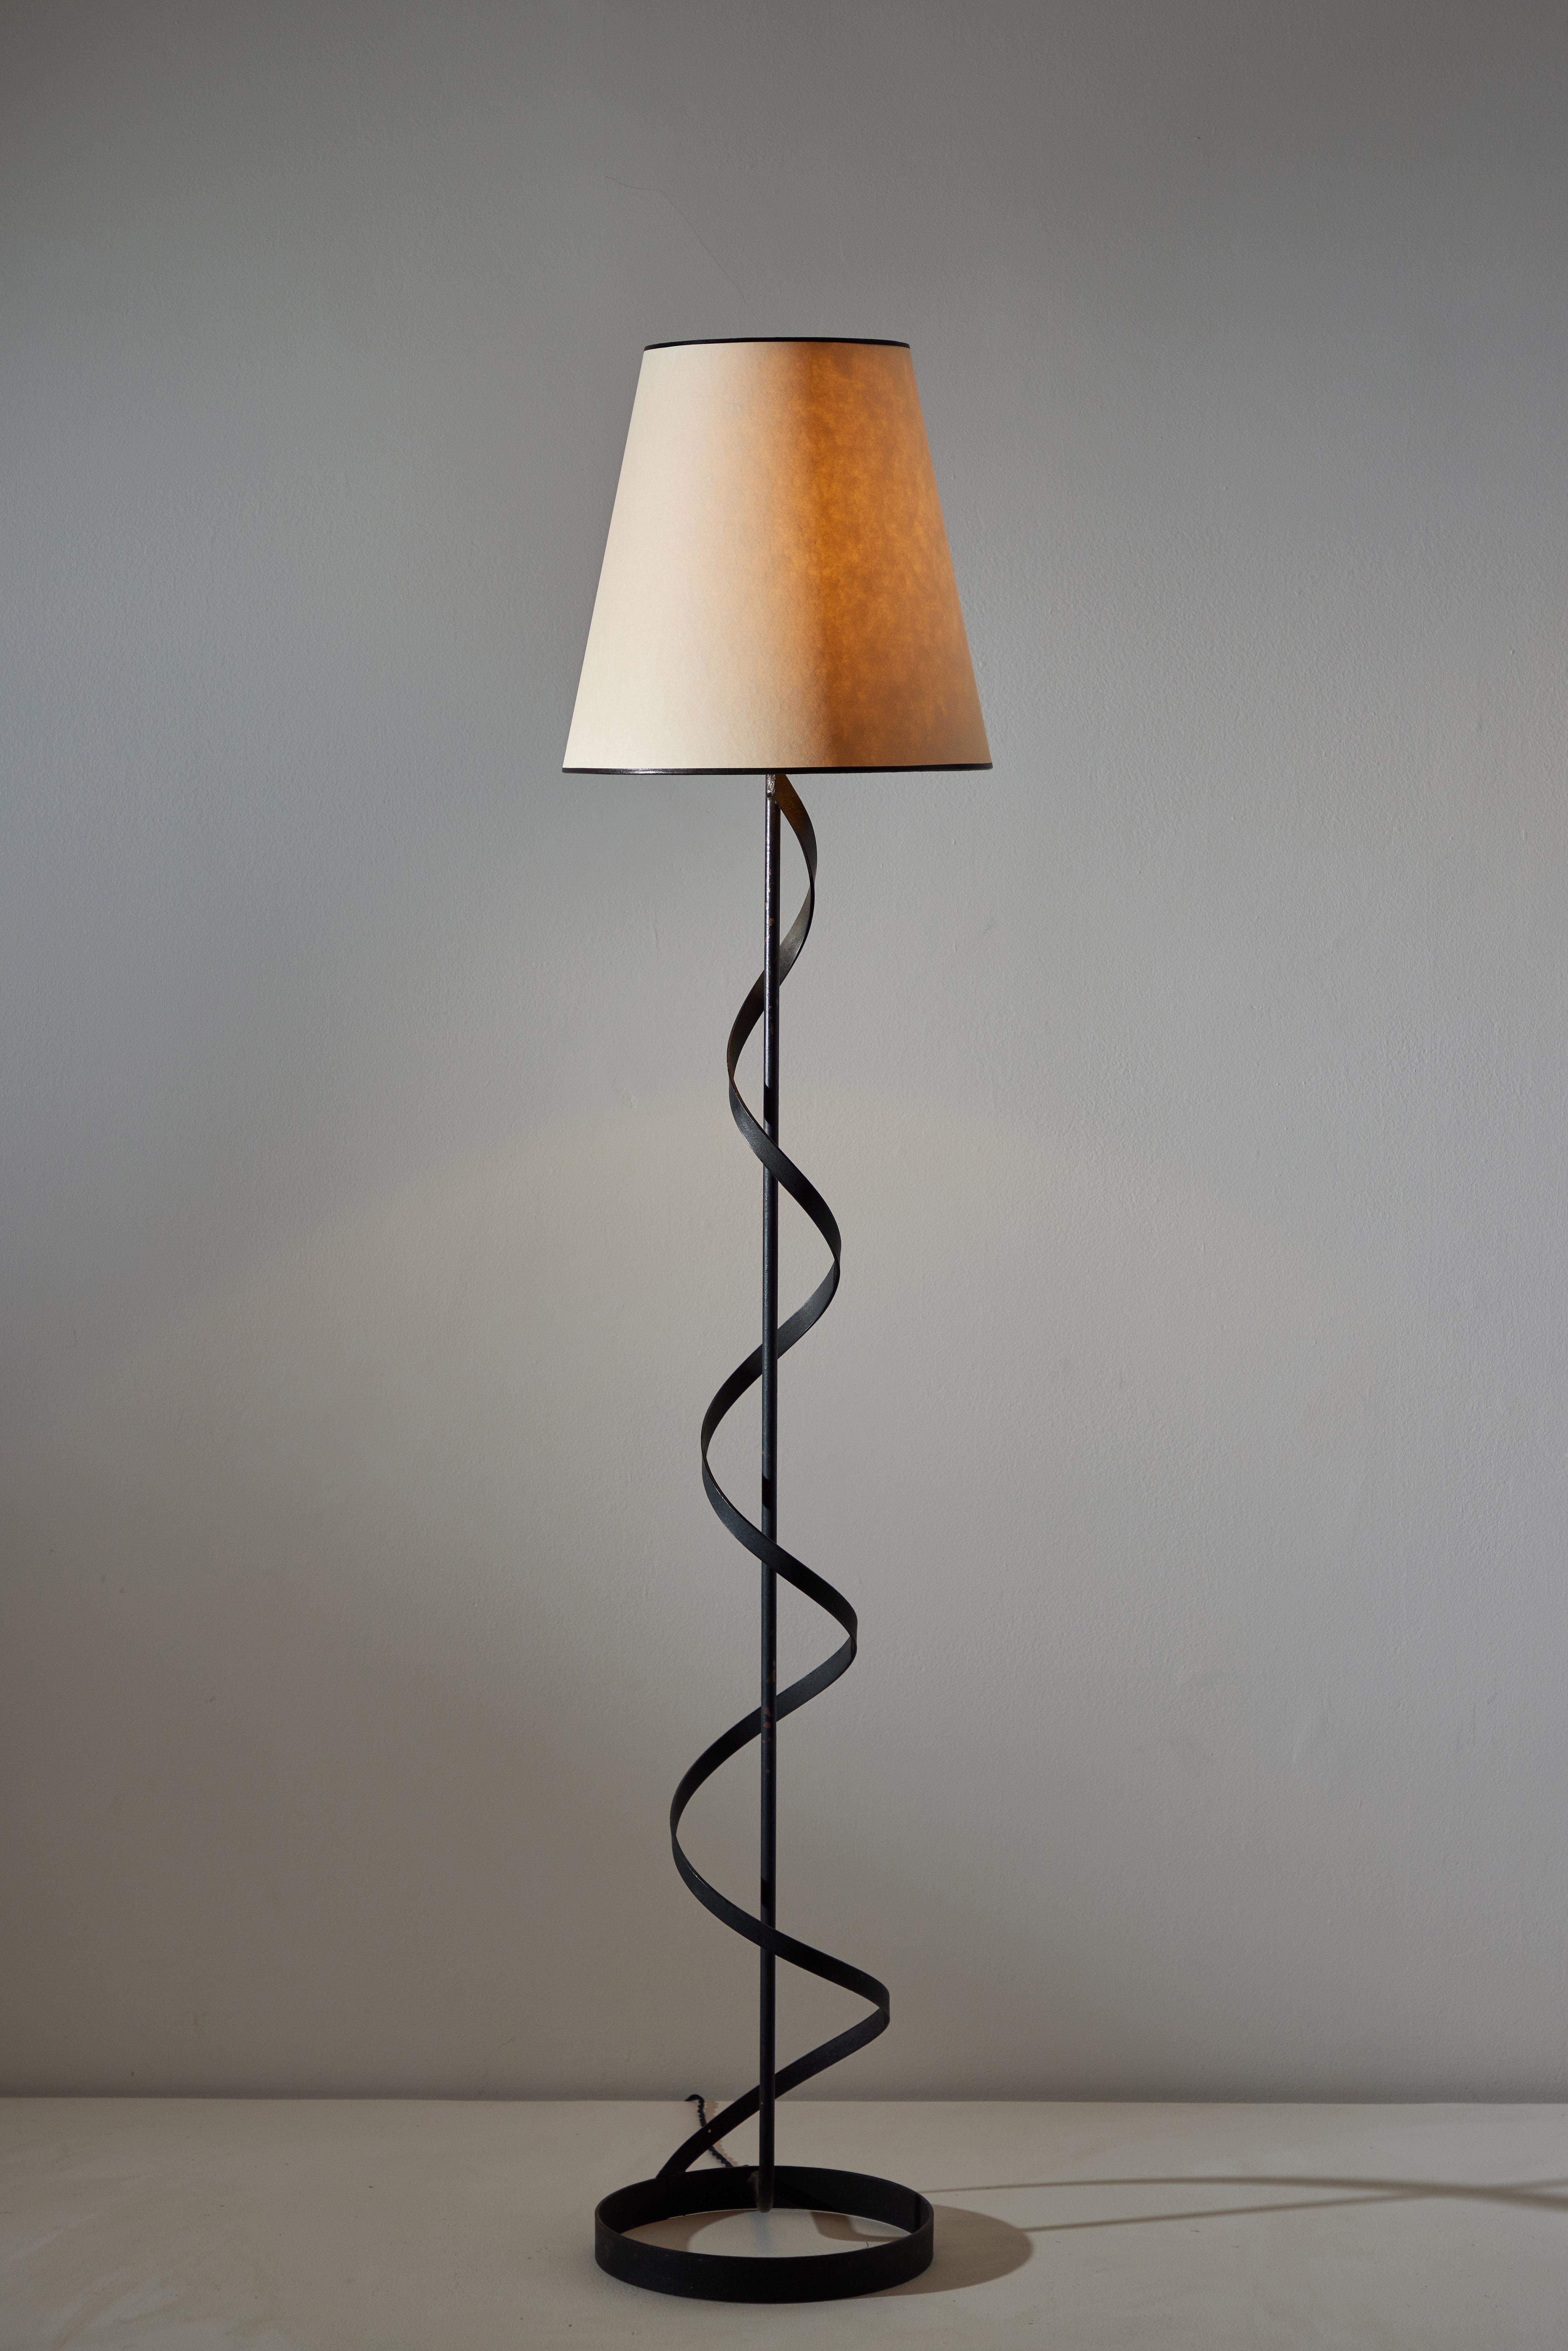 Floor lamp manufactured in the U.S. circa 1950's.  Custom parchment shade, silk trim, painted metal. We recommend one E26 60w maximum bulb. Bulb provided as a one time courtesy.